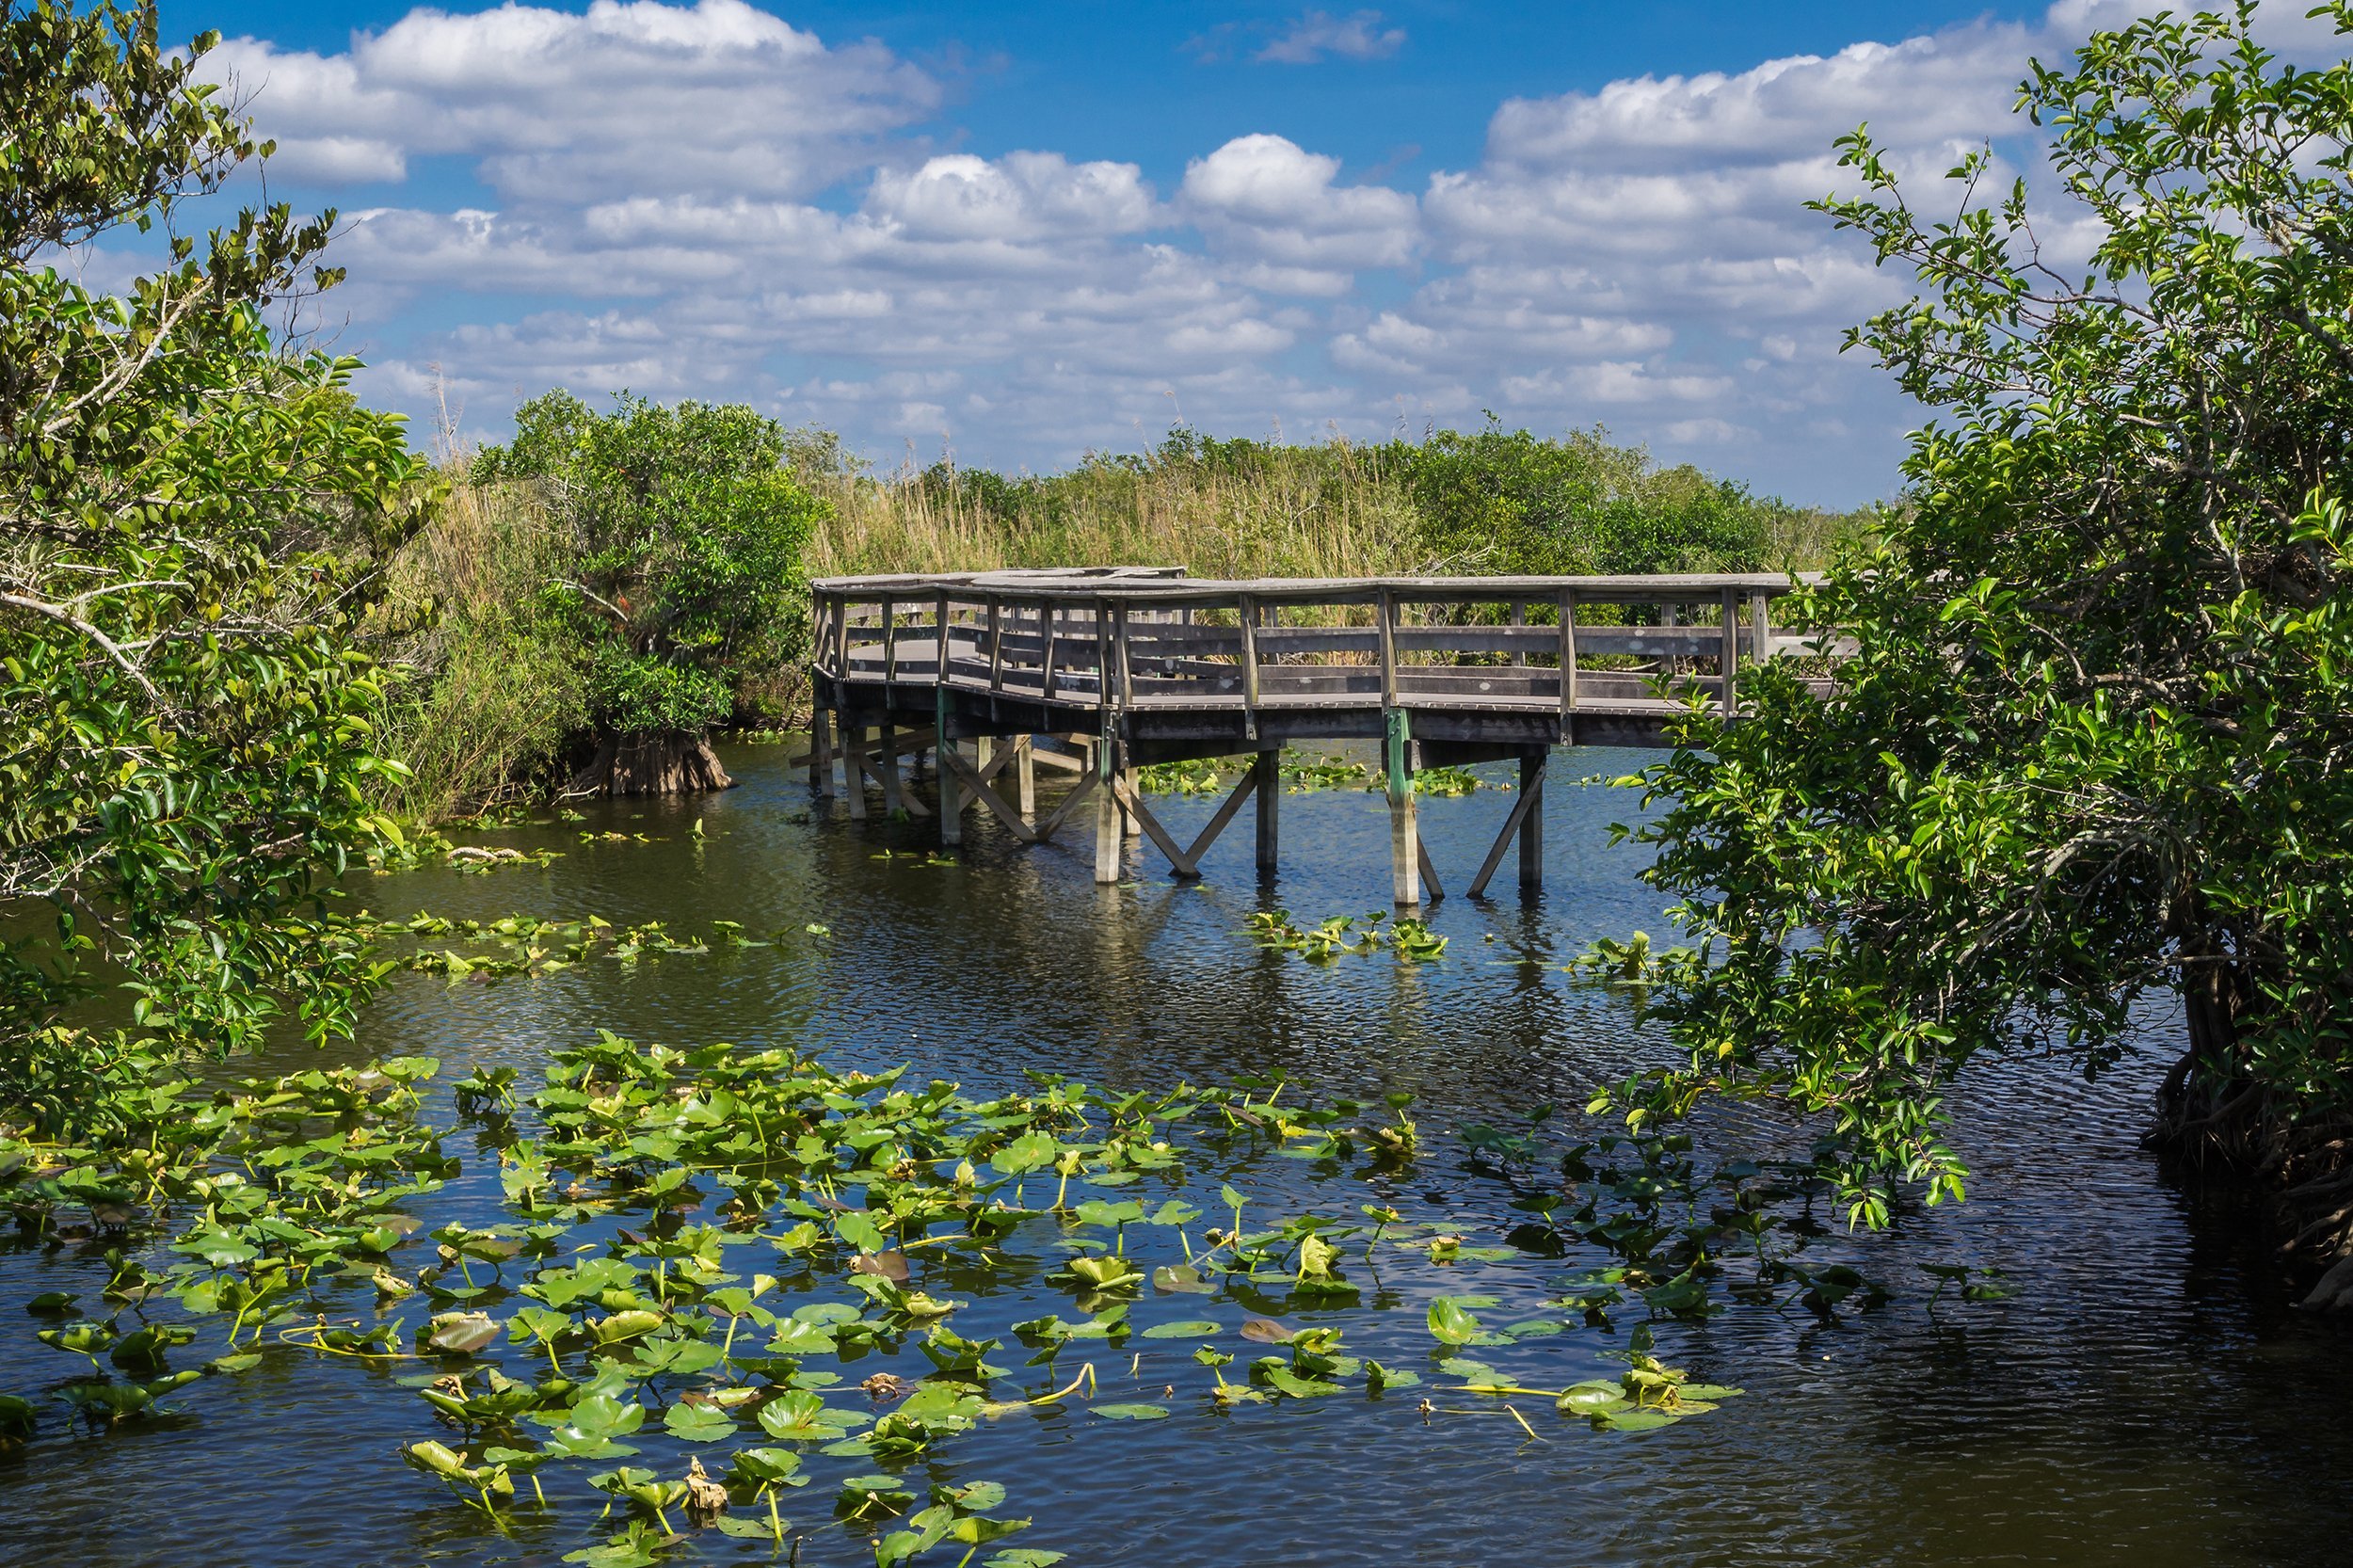 <p><a href="https://www.nps.gov/ever/planyourvisit/index.htm">Everglades National Park</a>, the largest tropical wilderness in the United States, is just an hour west of Miami. The entry fee is $30 per car and it's good for seven days, leaving plenty of time to explore the park's fantastically diverse environment, which includes mangrove swamps, freshwater sloughs, and cypress forests. The park is home to a dazzling array of wildlife, ranging from crocodiles, manatees, and panthers to more than 350 species of birds and 300 species of fresh and saltwater fish.</p>